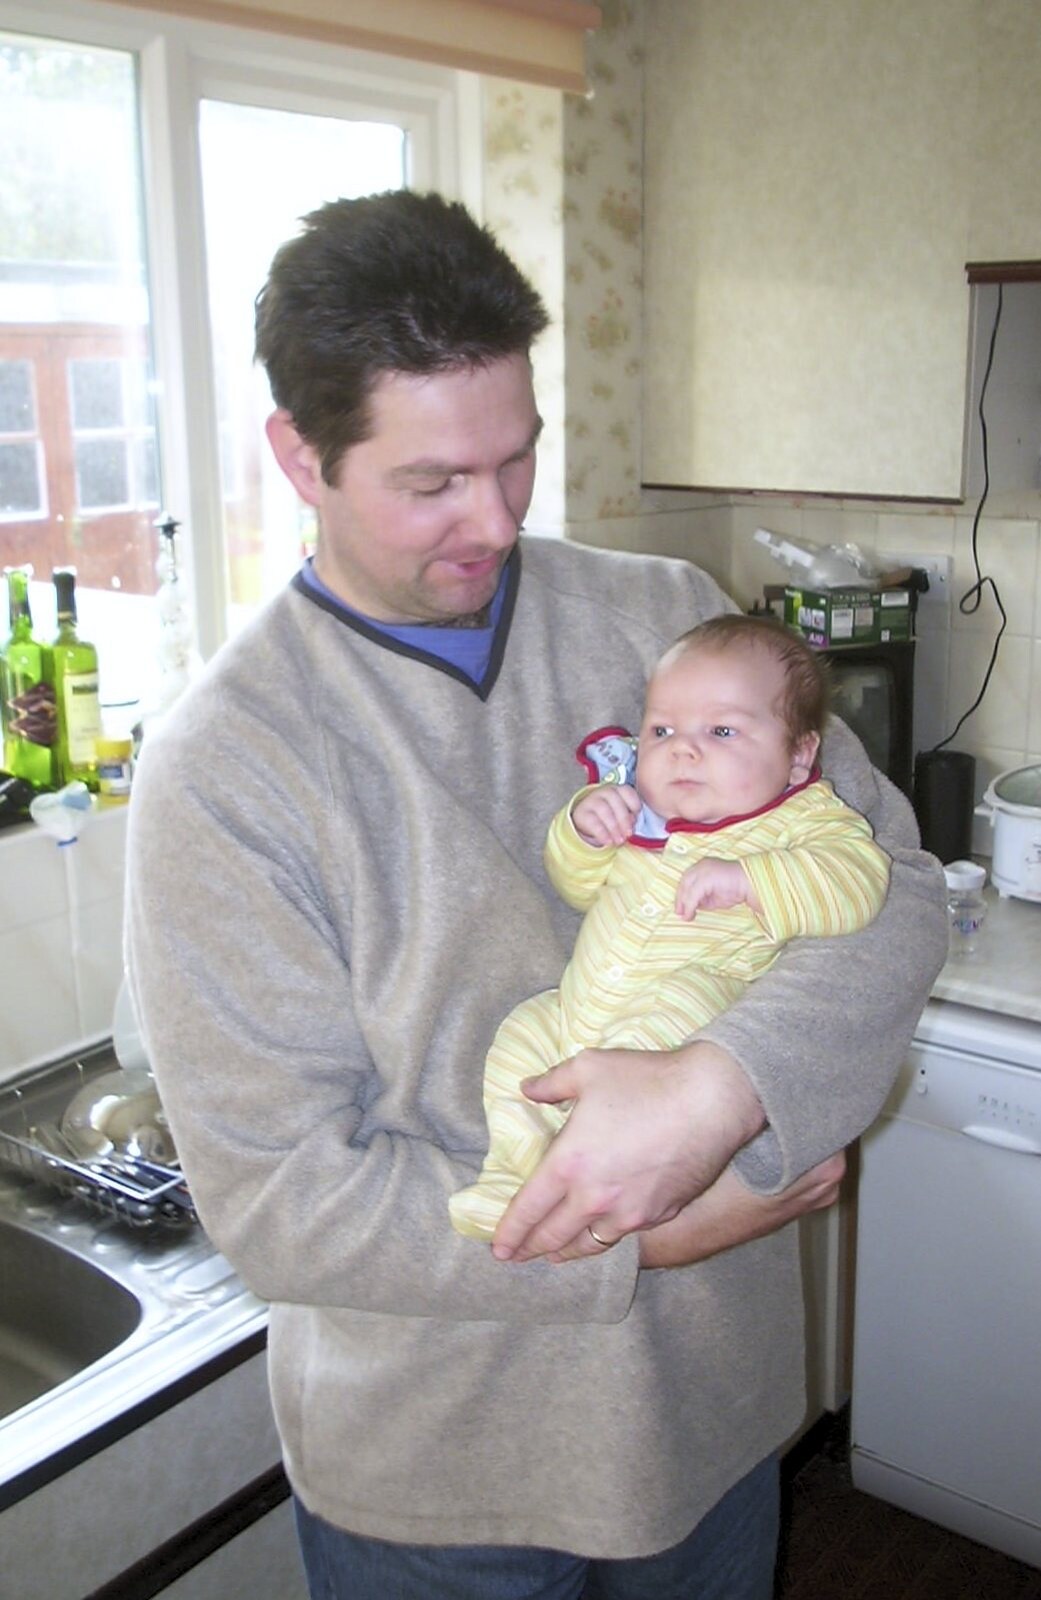 A New Forest Weekender, Hordle, Hampshire - 19th October 2003: Sean with Rowan in the kitchen